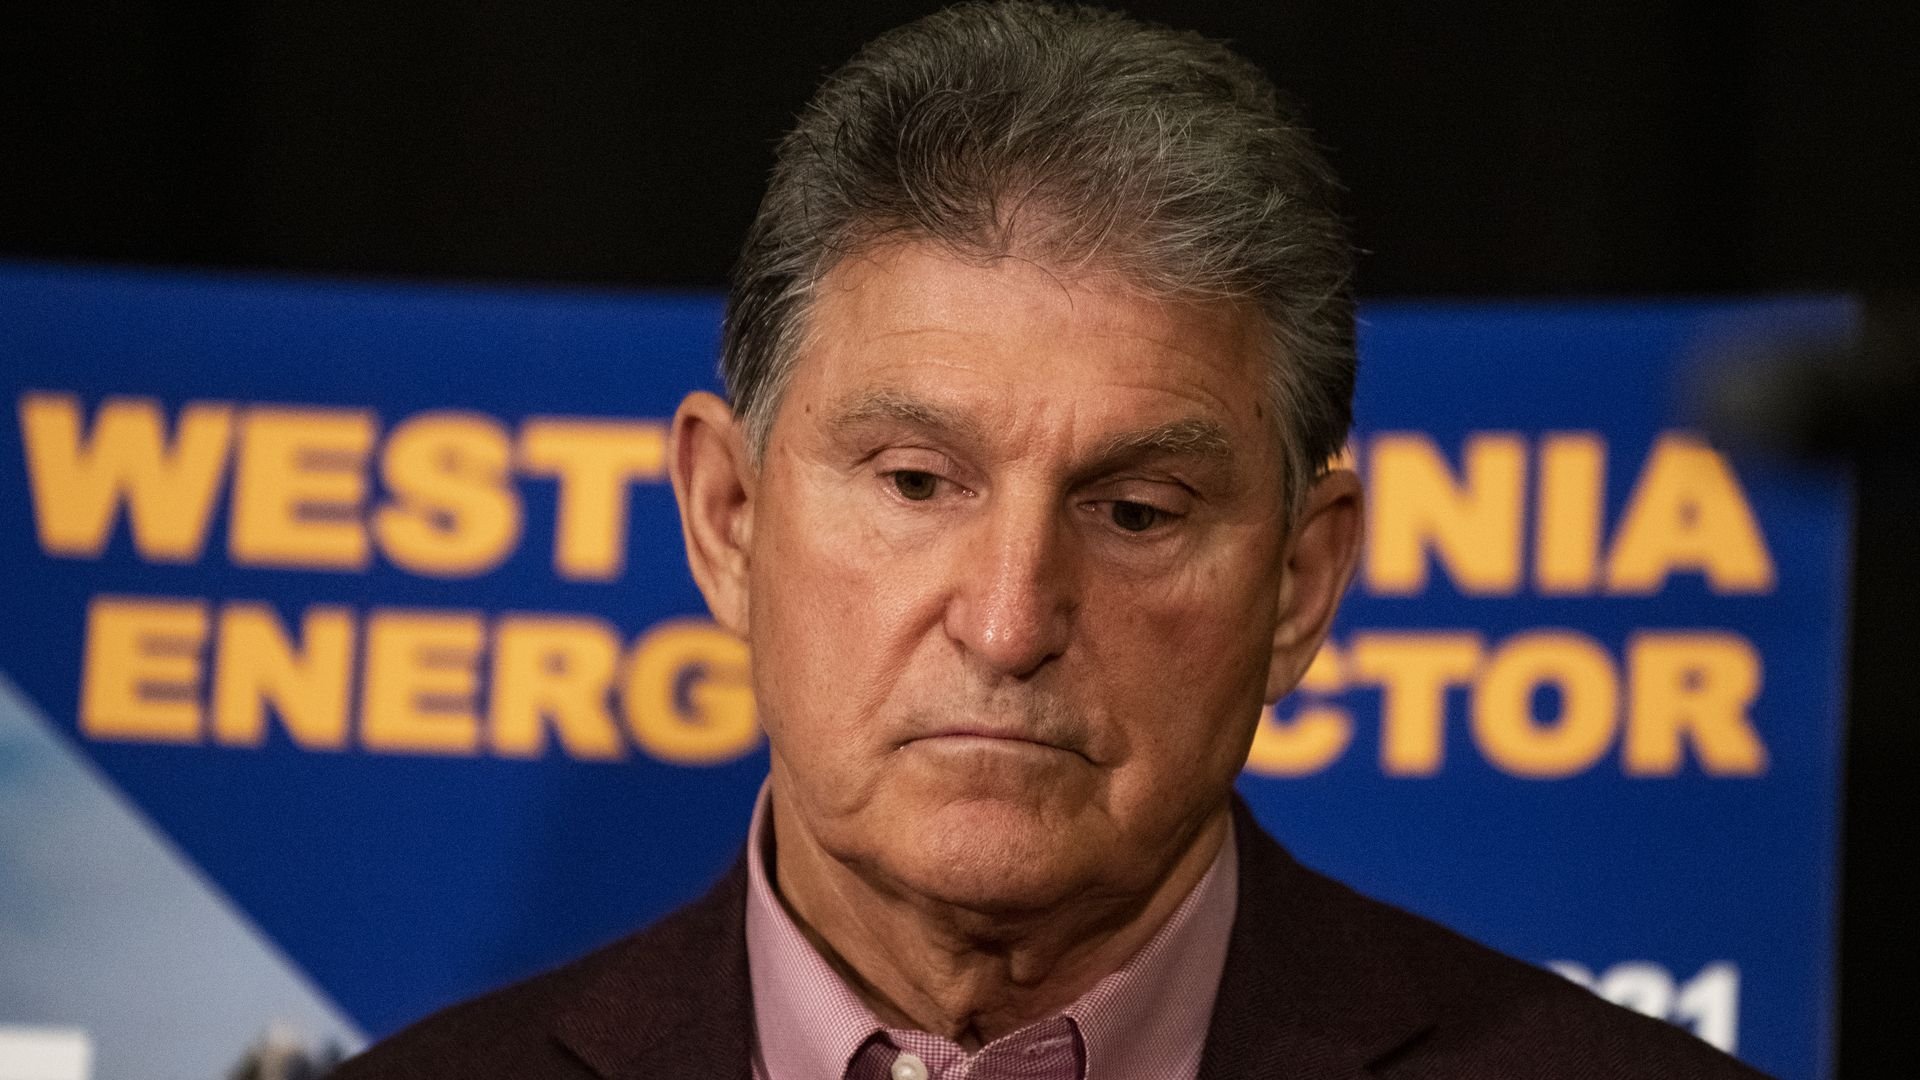 Manchin says he won't vote for Democrats' sweeping election reform bill